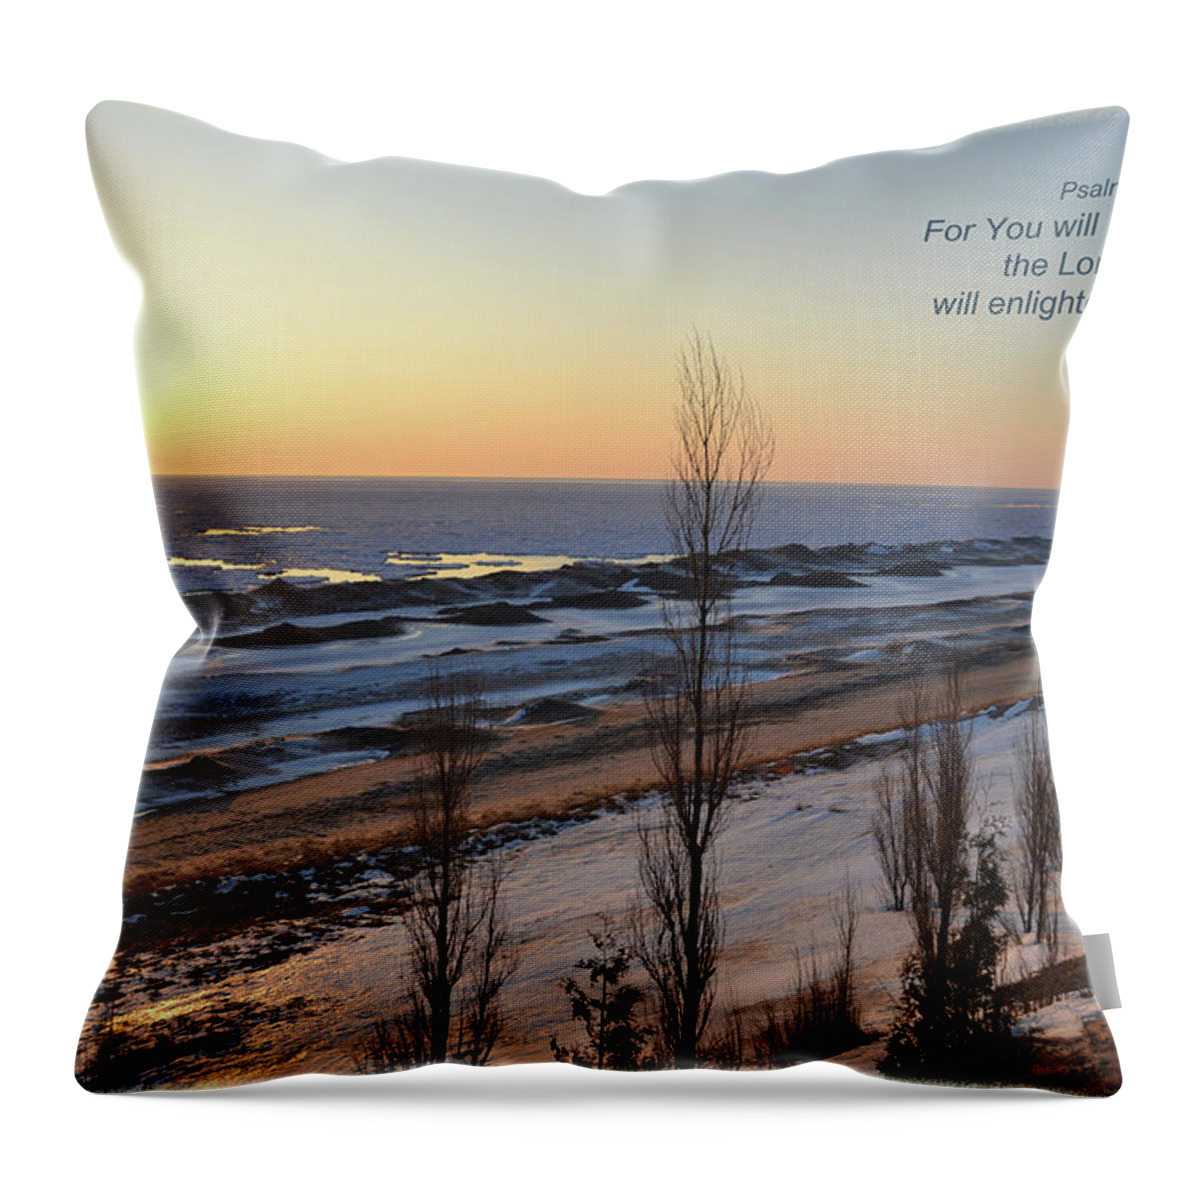  Throw Pillow featuring the mixed media Psalm 18 28 by Lori Tondini